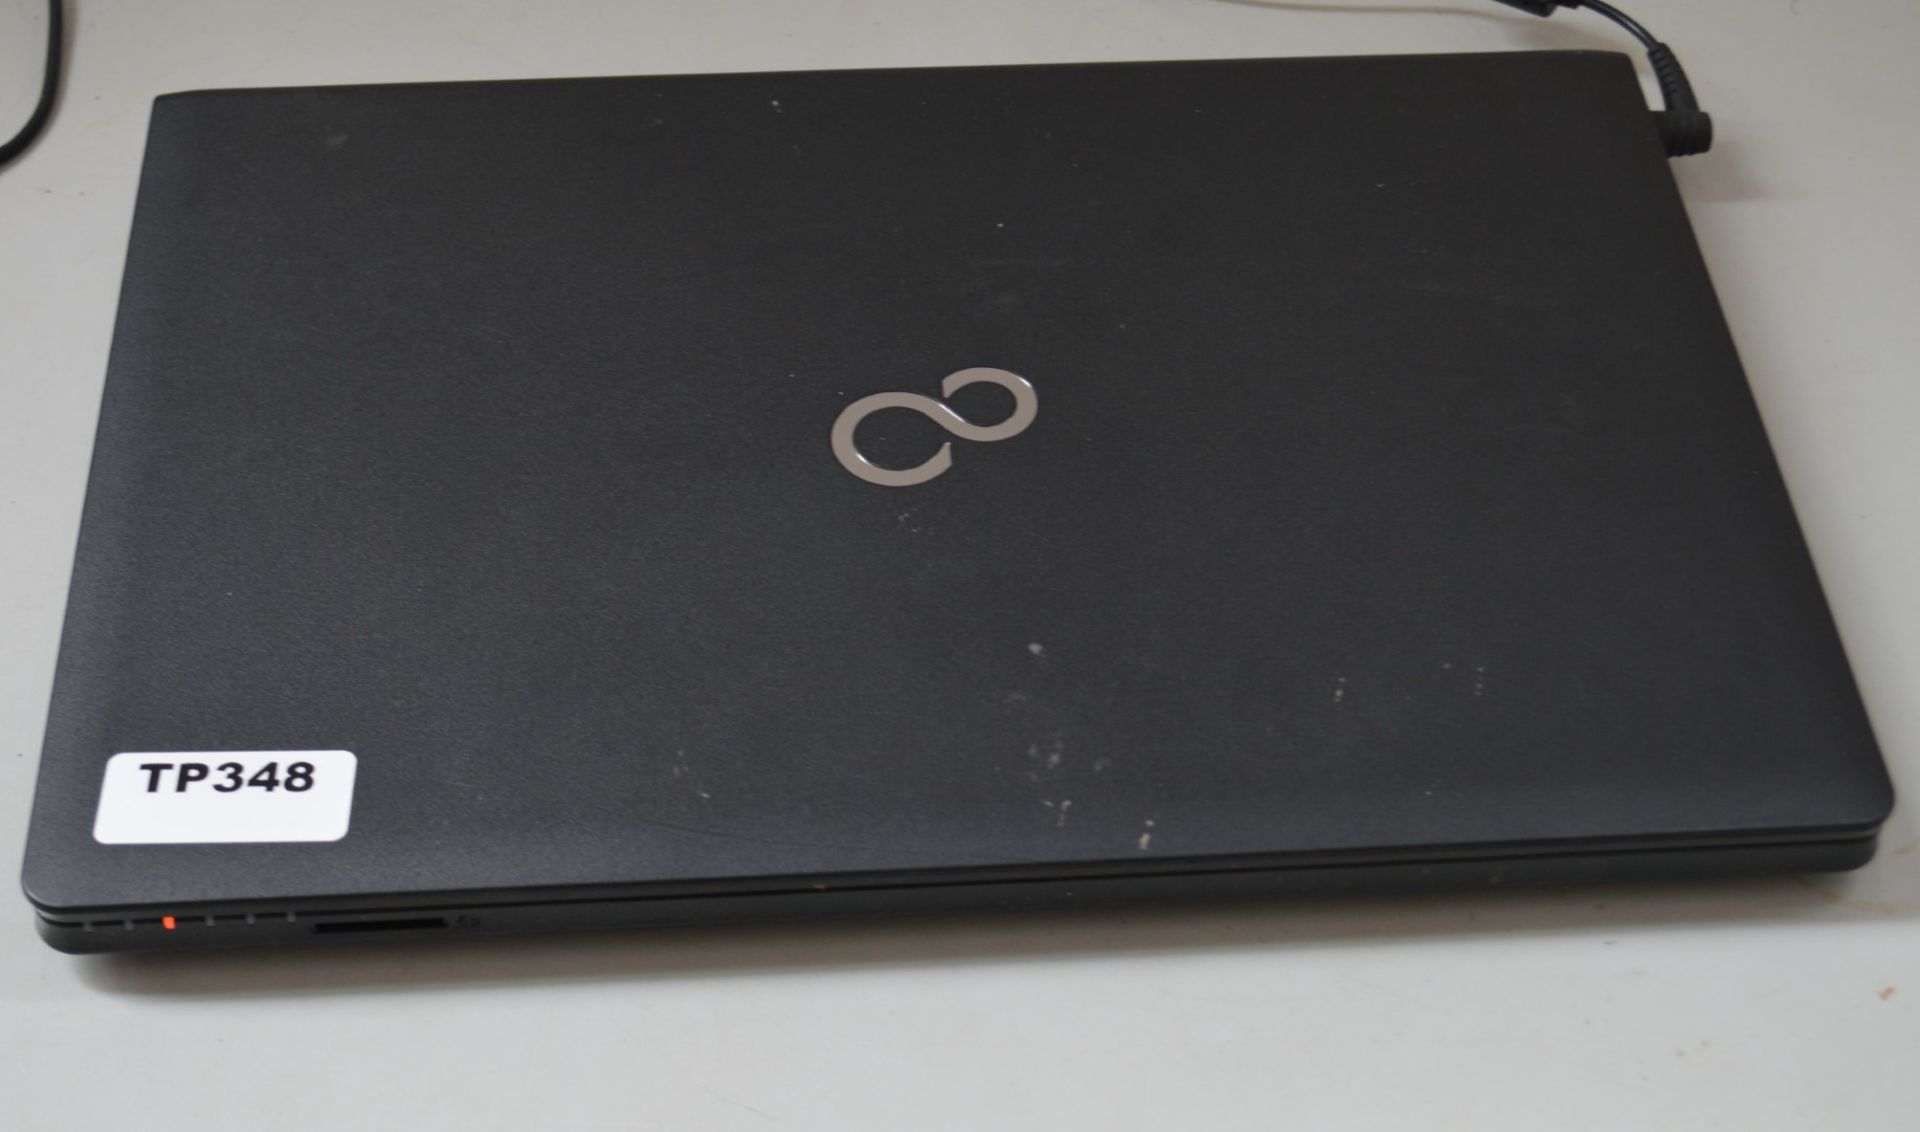 1 x Fujitsu LIFEBOOK A555 15.6-Inch Laptop Computer - Ref TP348 - Image 2 of 3